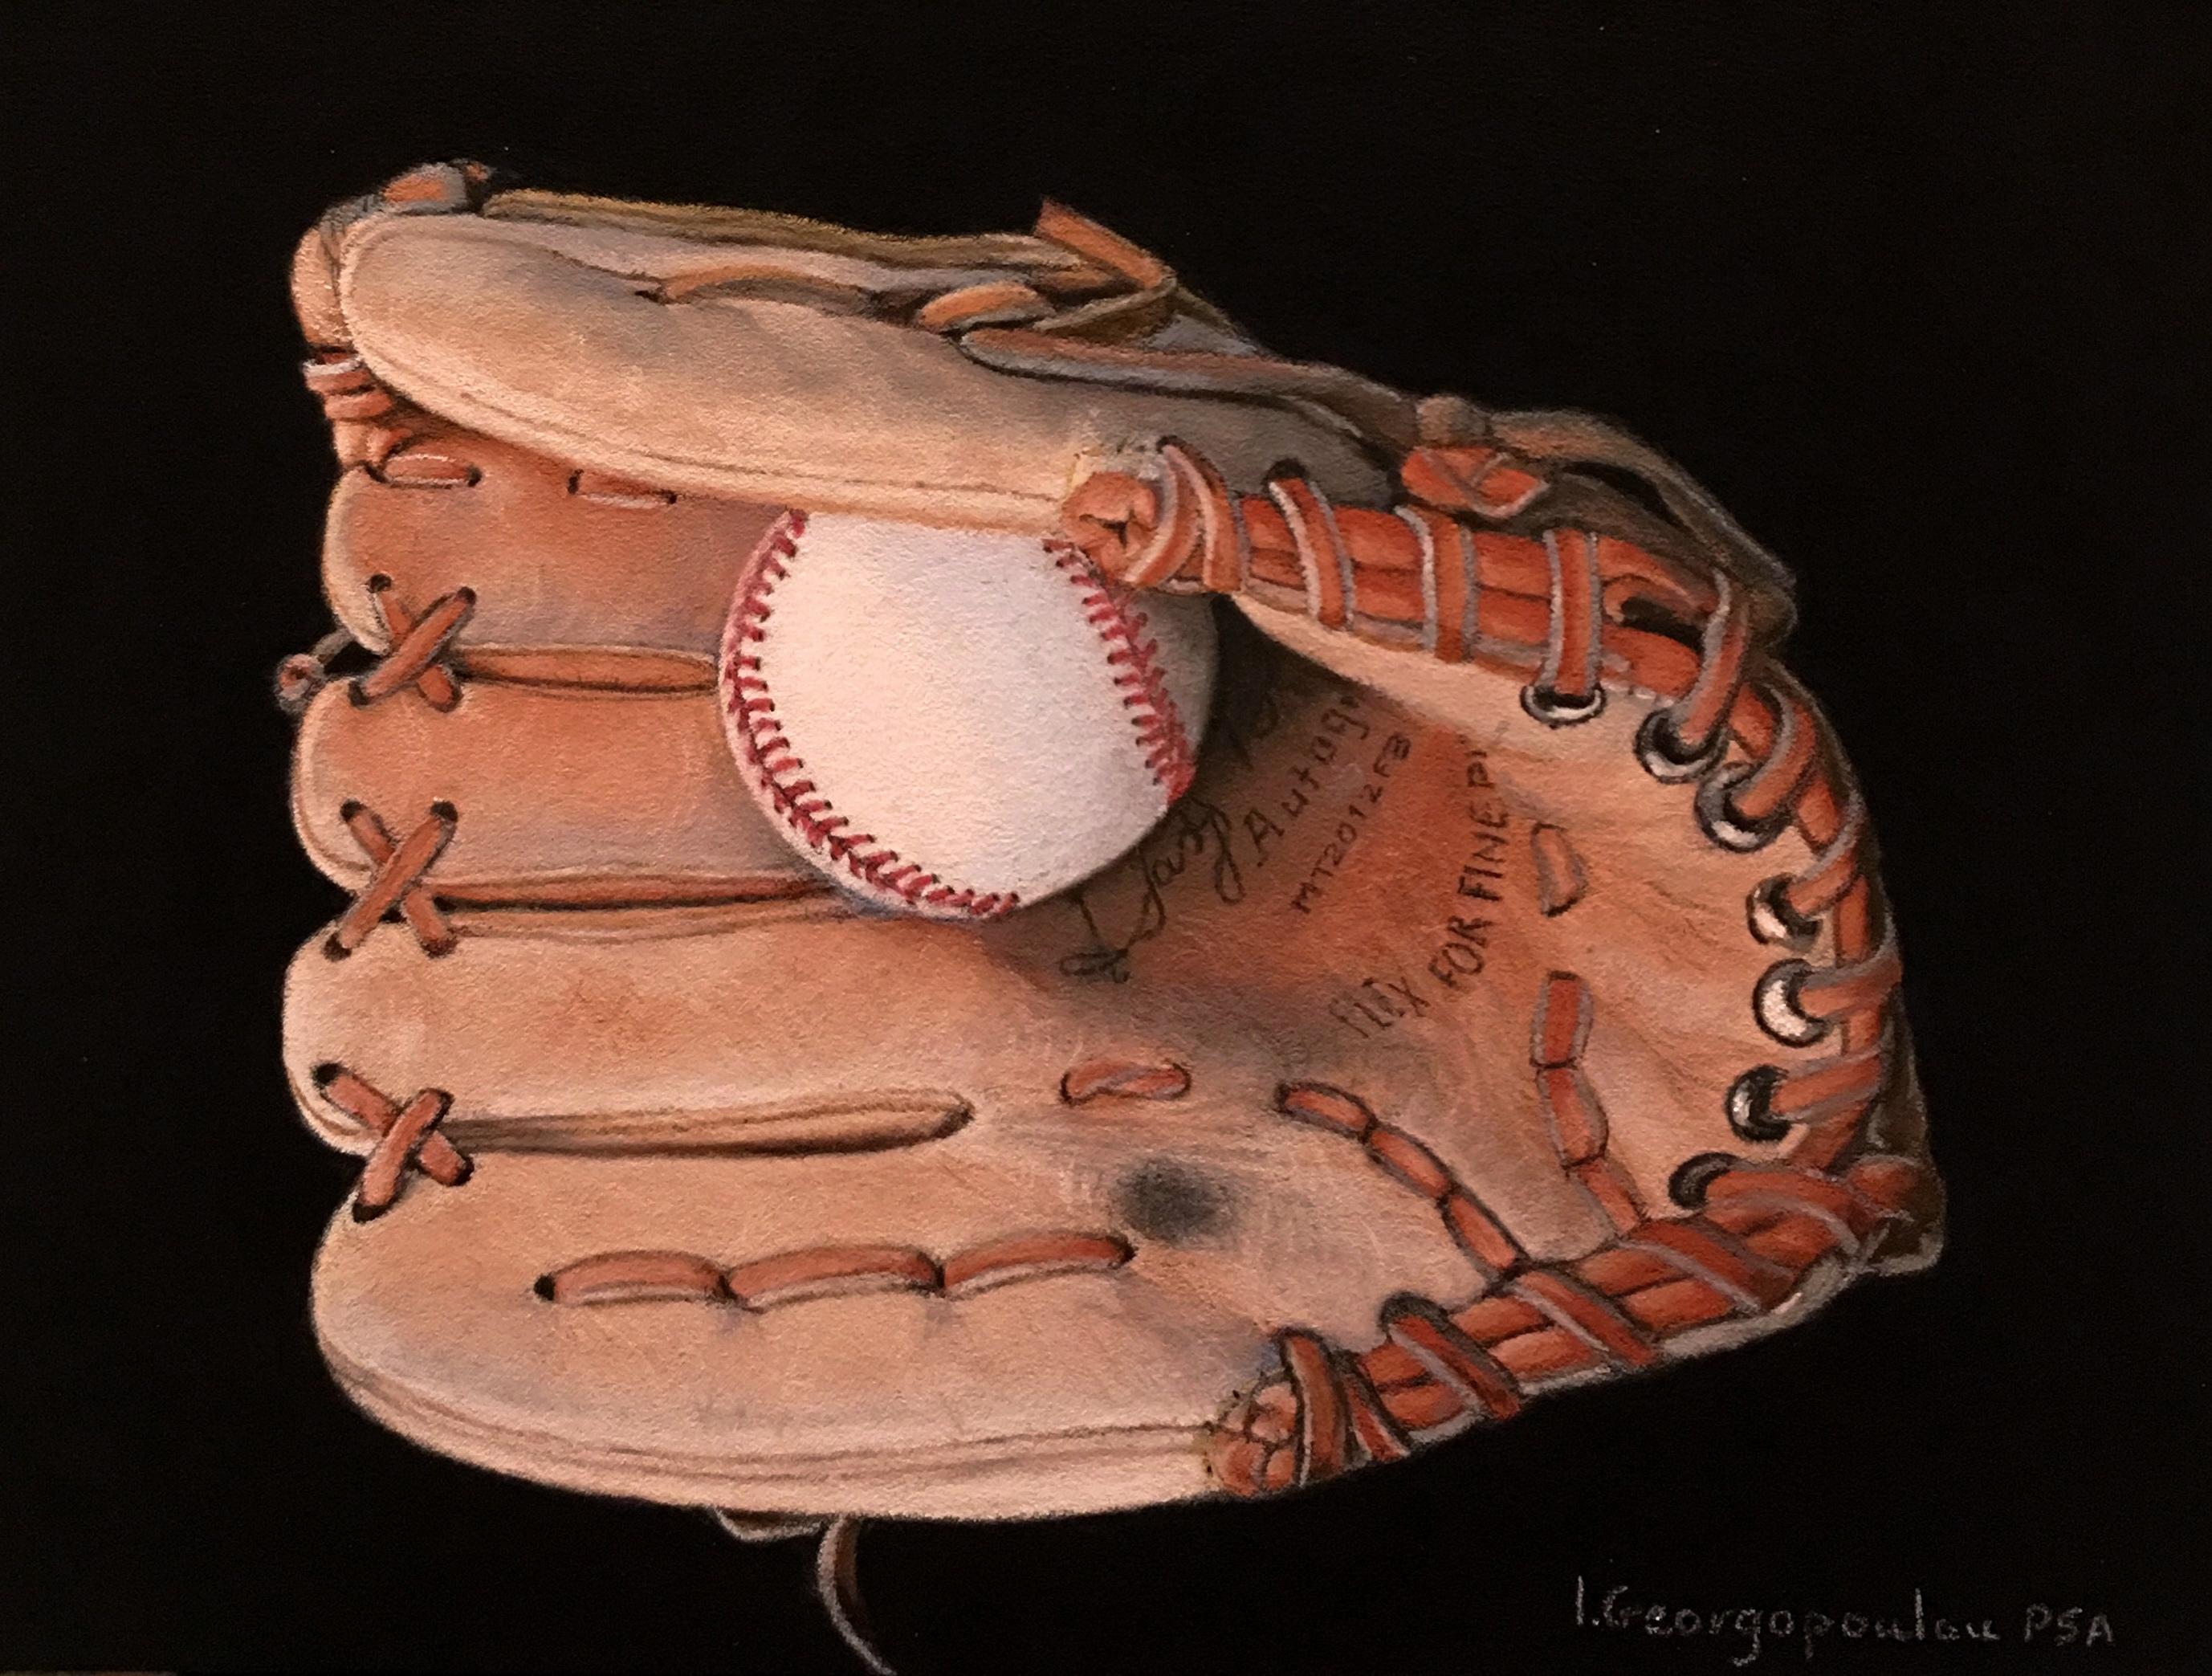 Irene Georgopoulou Still-Life - "Old Glove and Ball" Pastel Drawing 